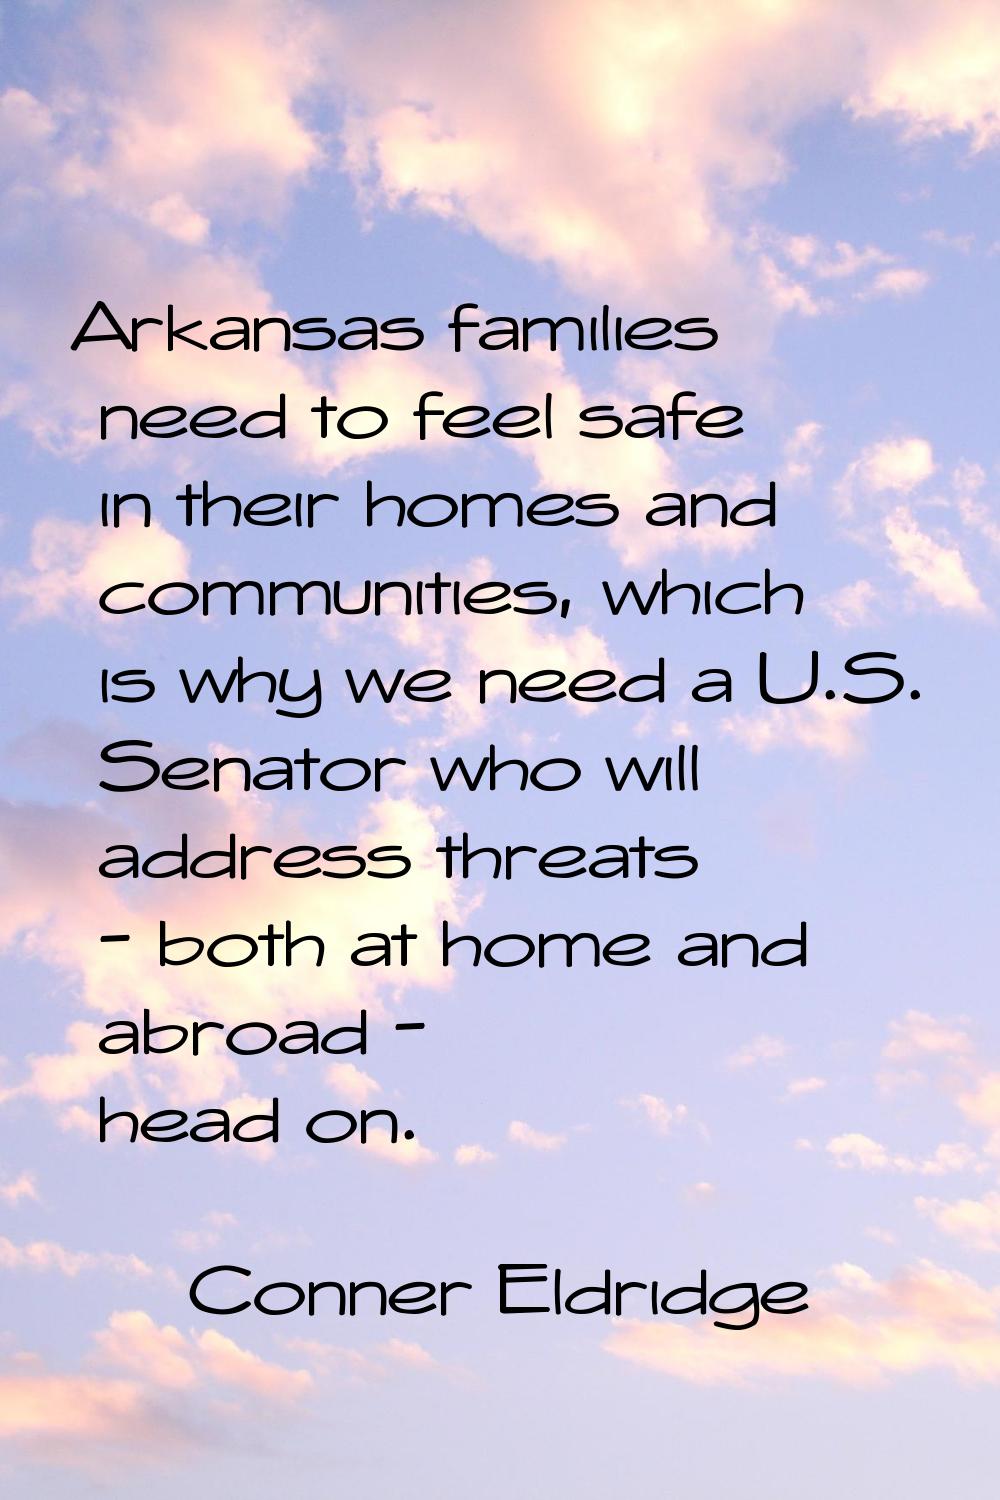 Arkansas families need to feel safe in their homes and communities, which is why we need a U.S. Sen